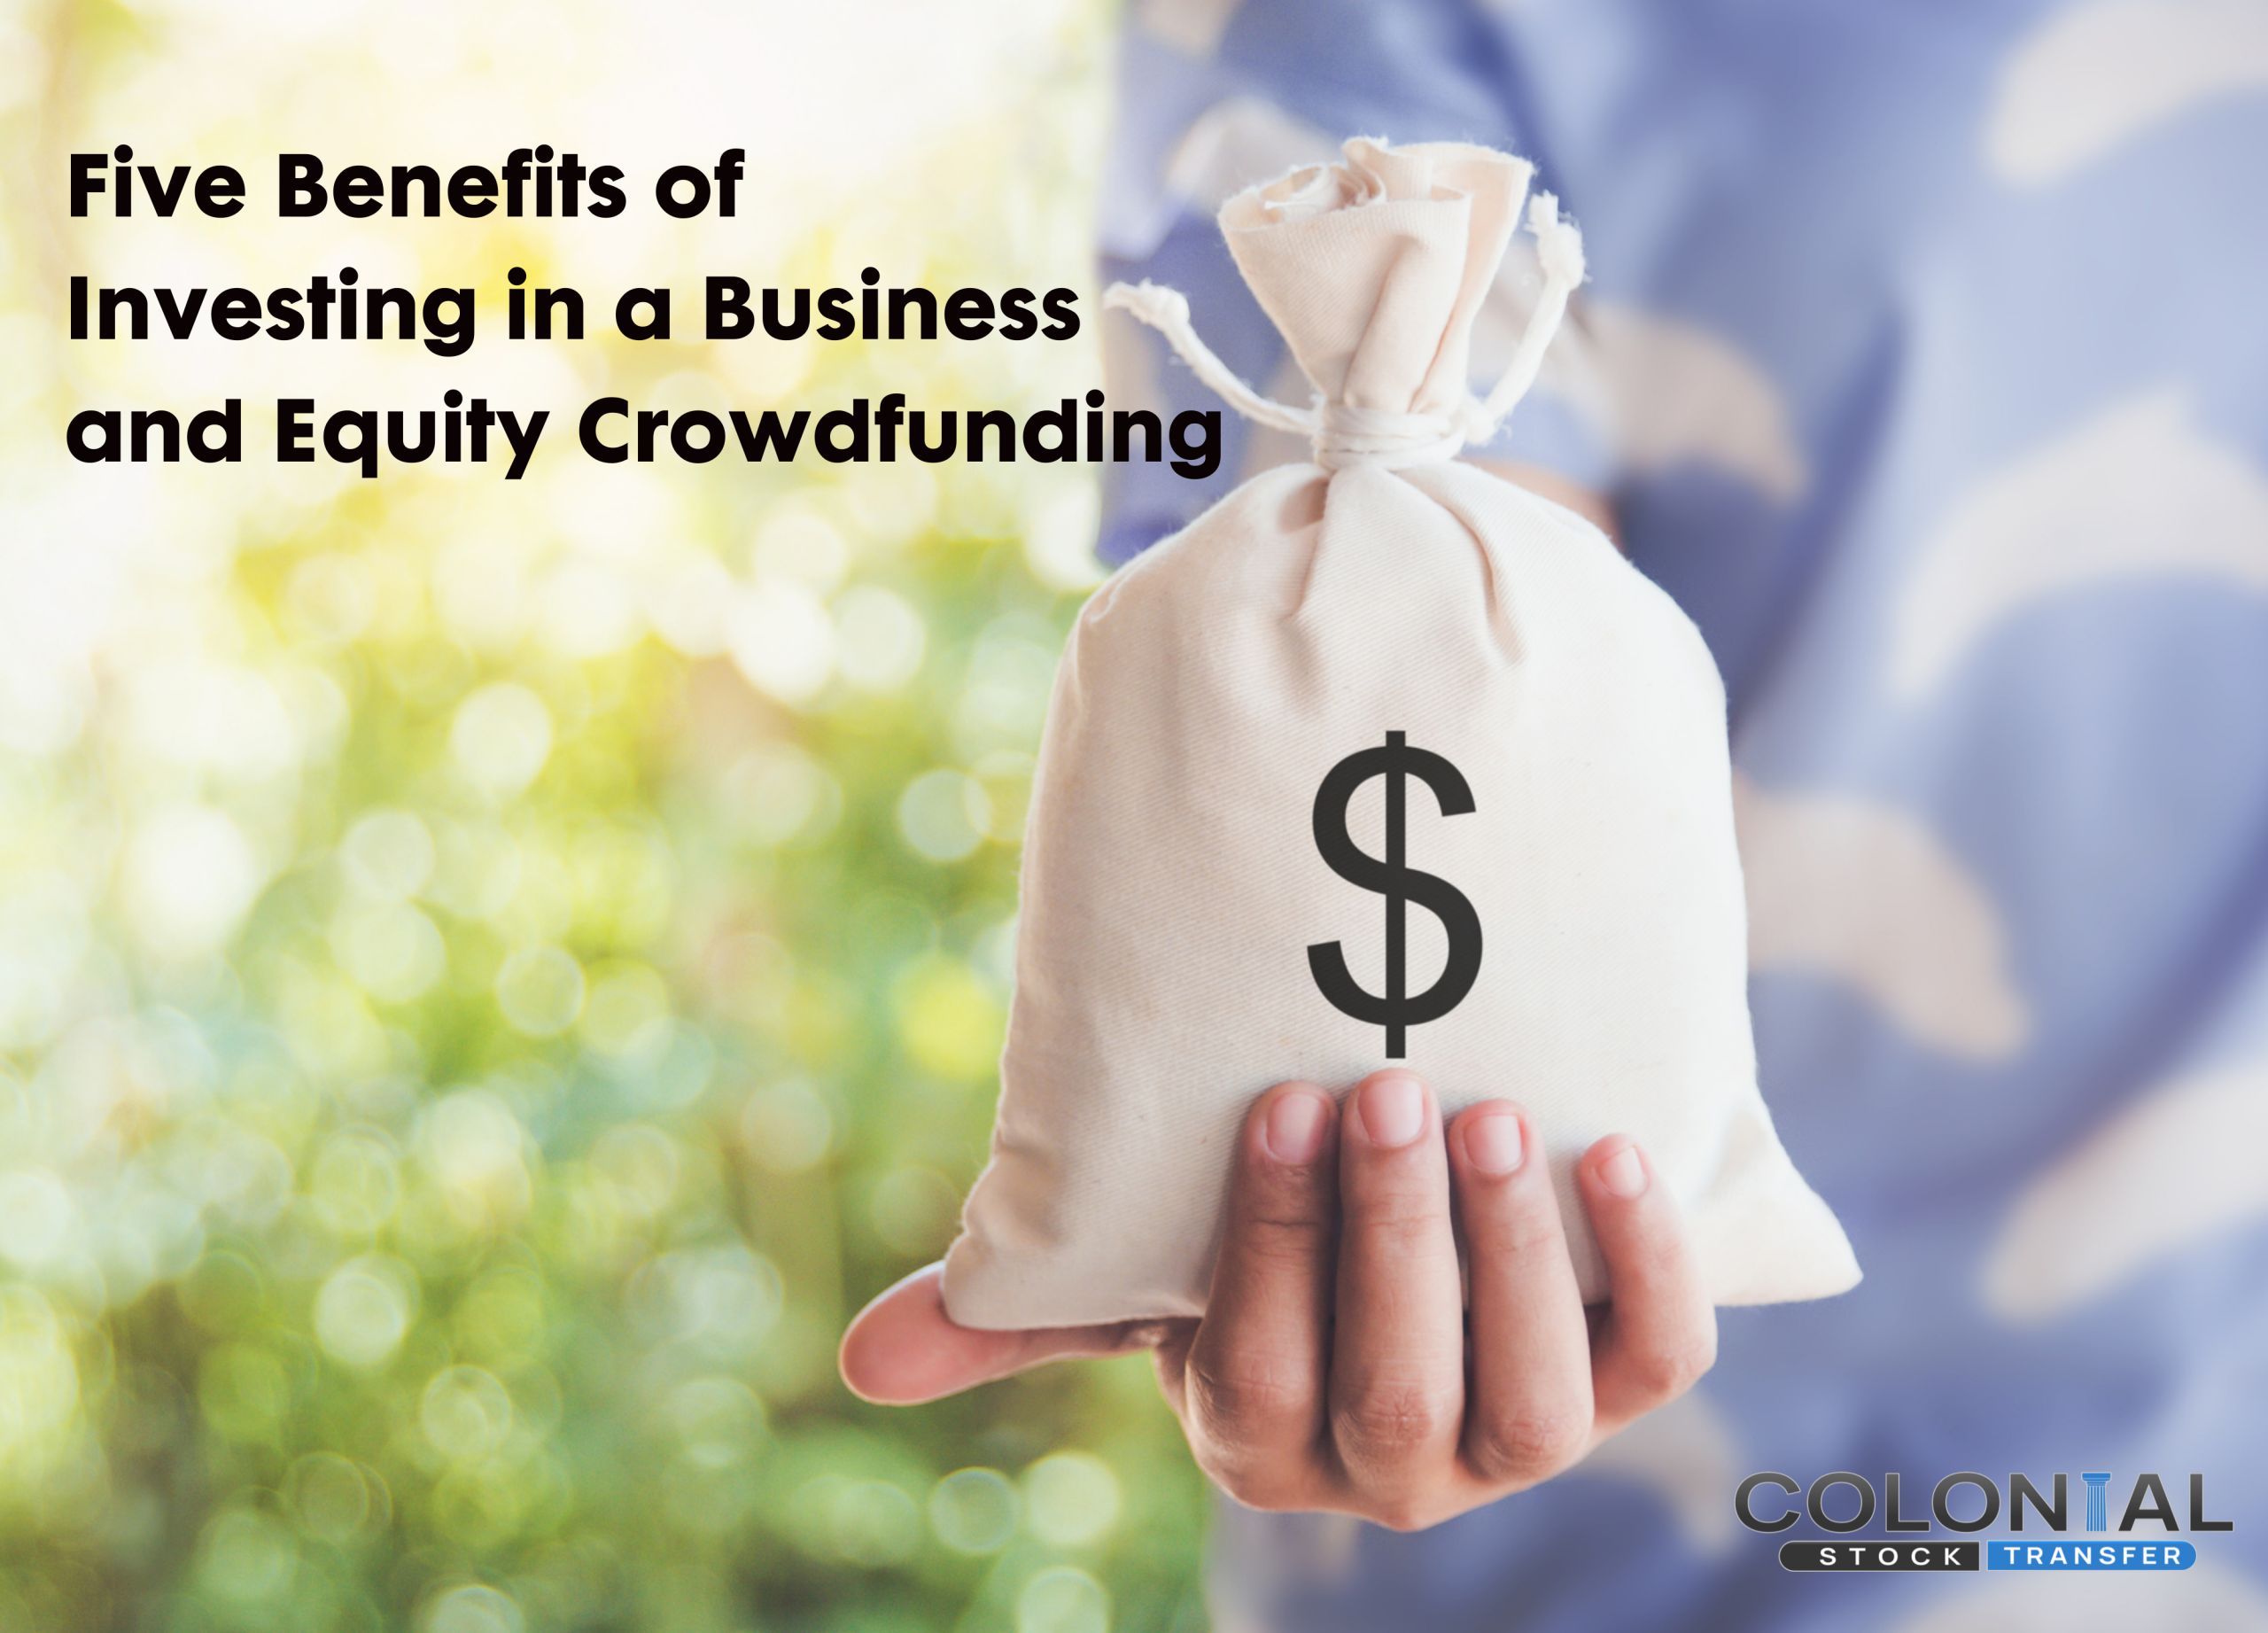 Five Benefits of Investing in a Business and Equity Crowdfunding